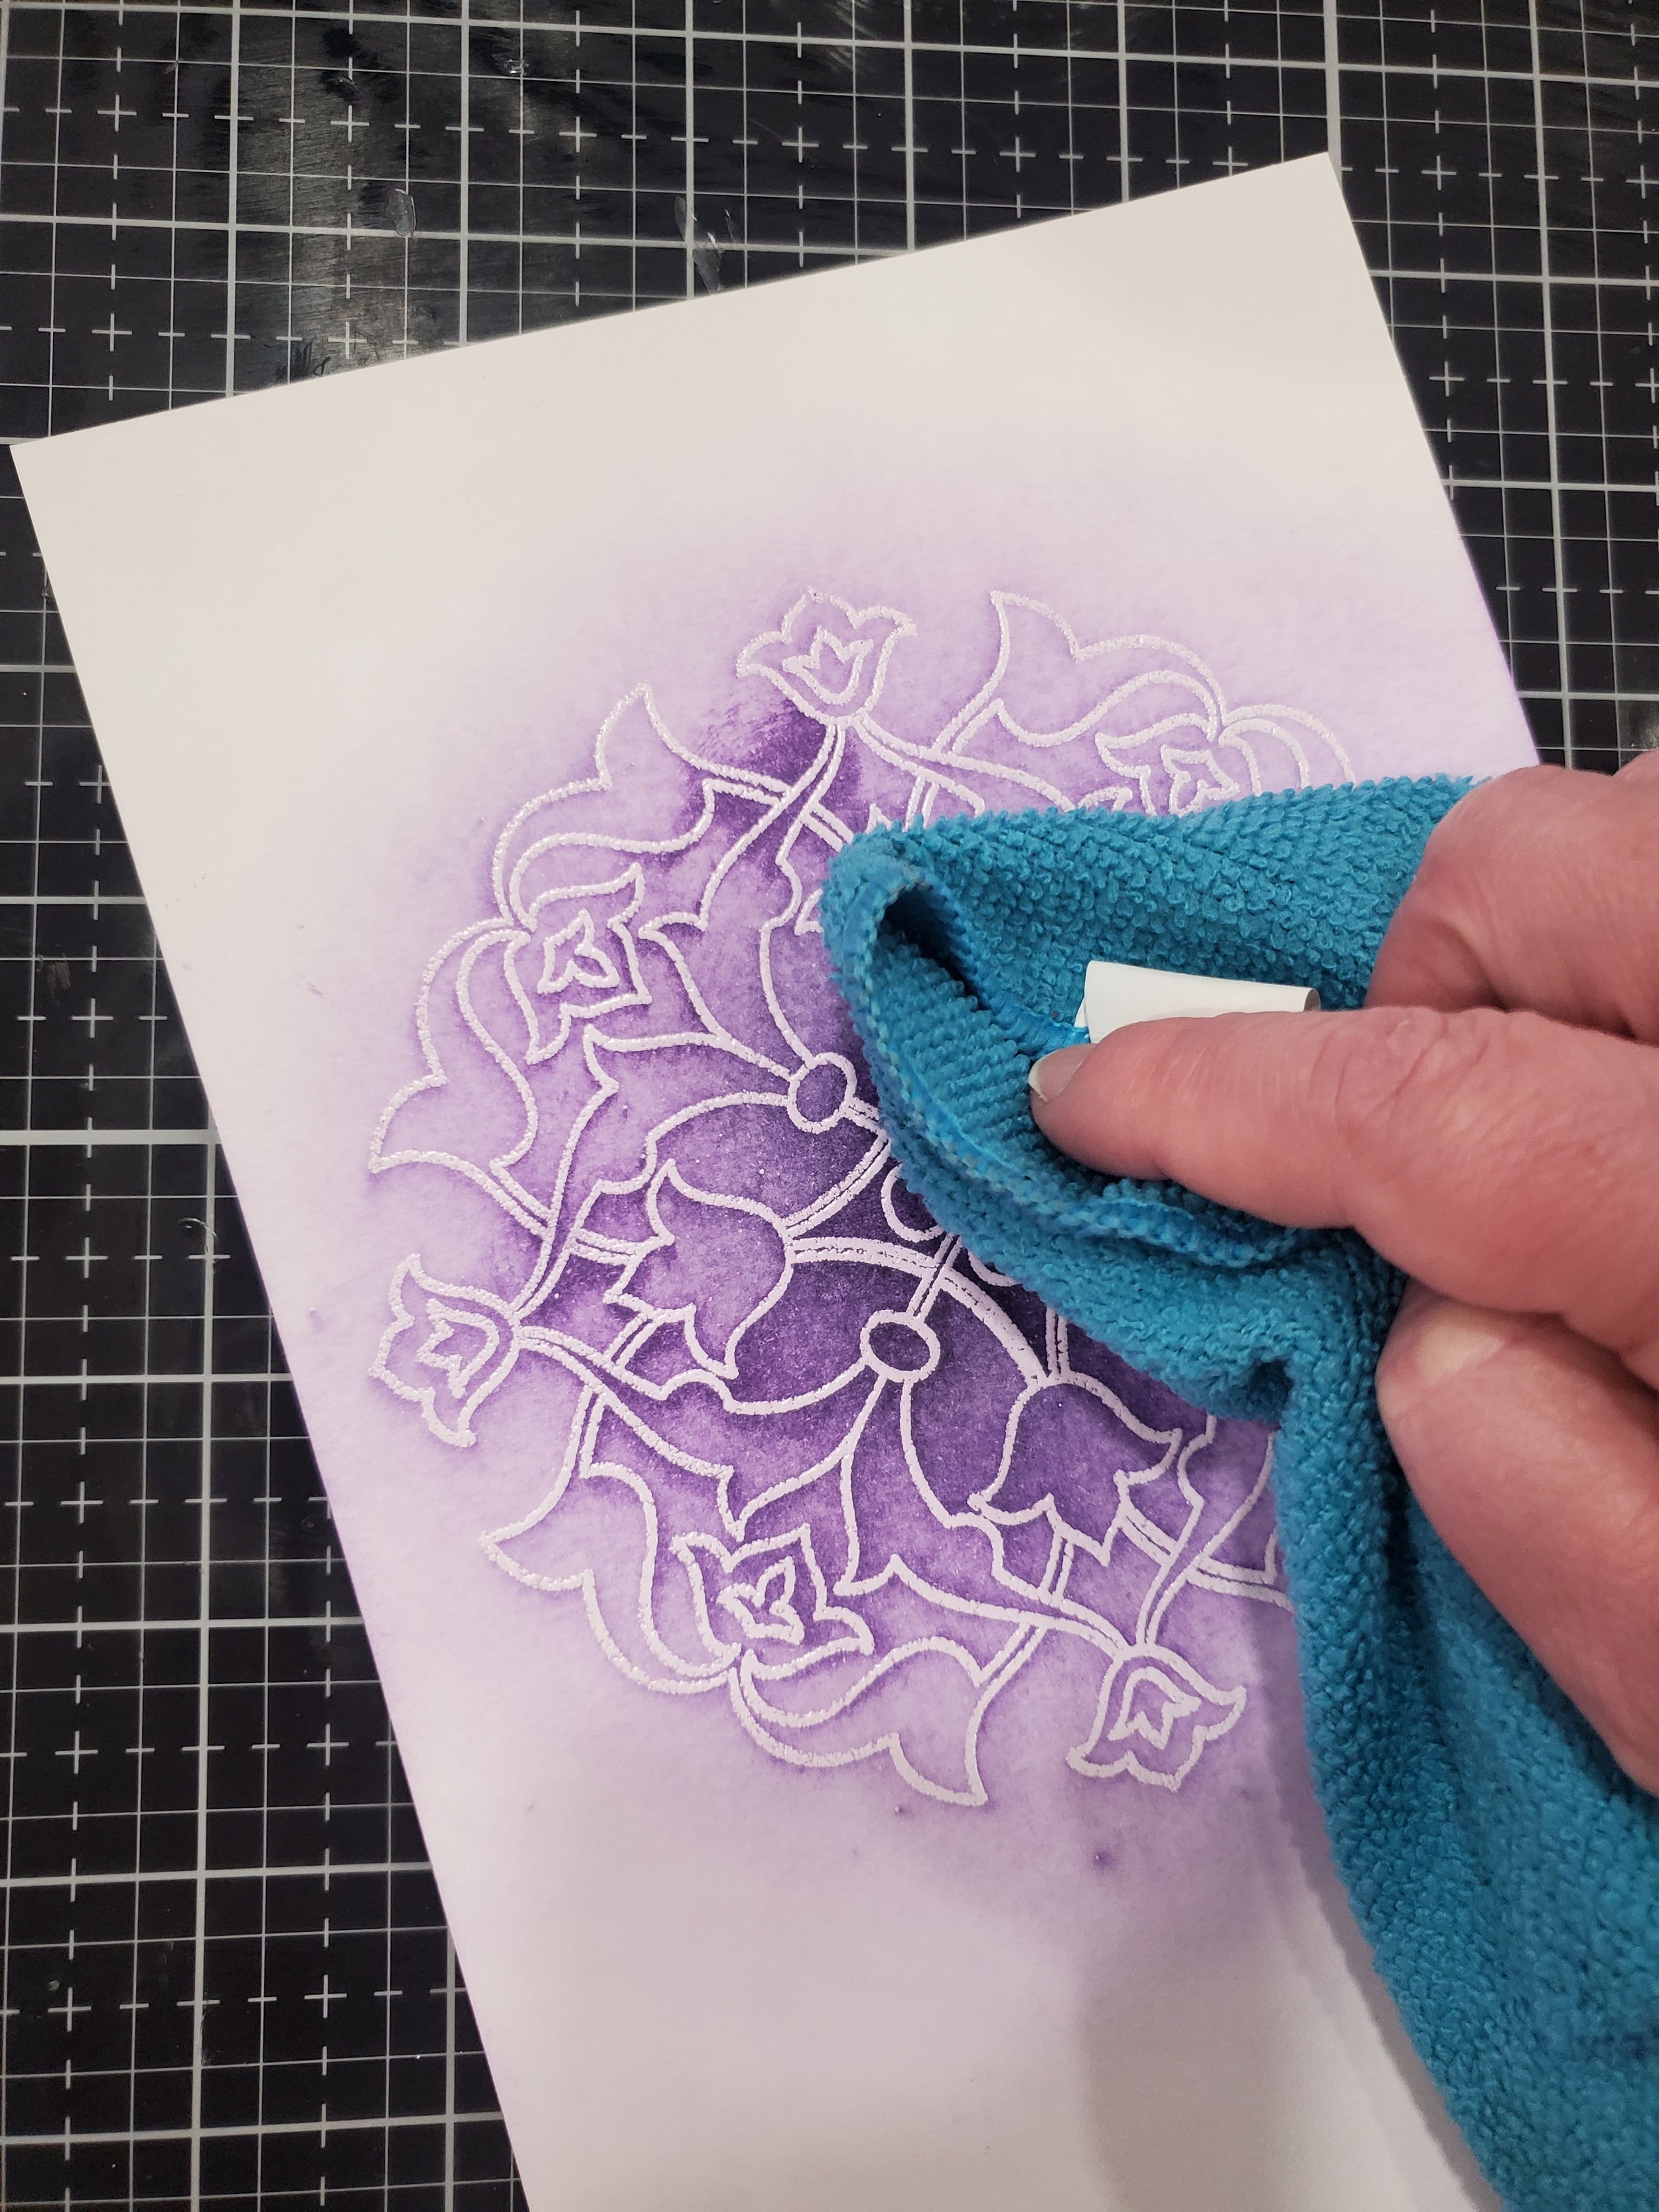 Remove excess from embossing powder